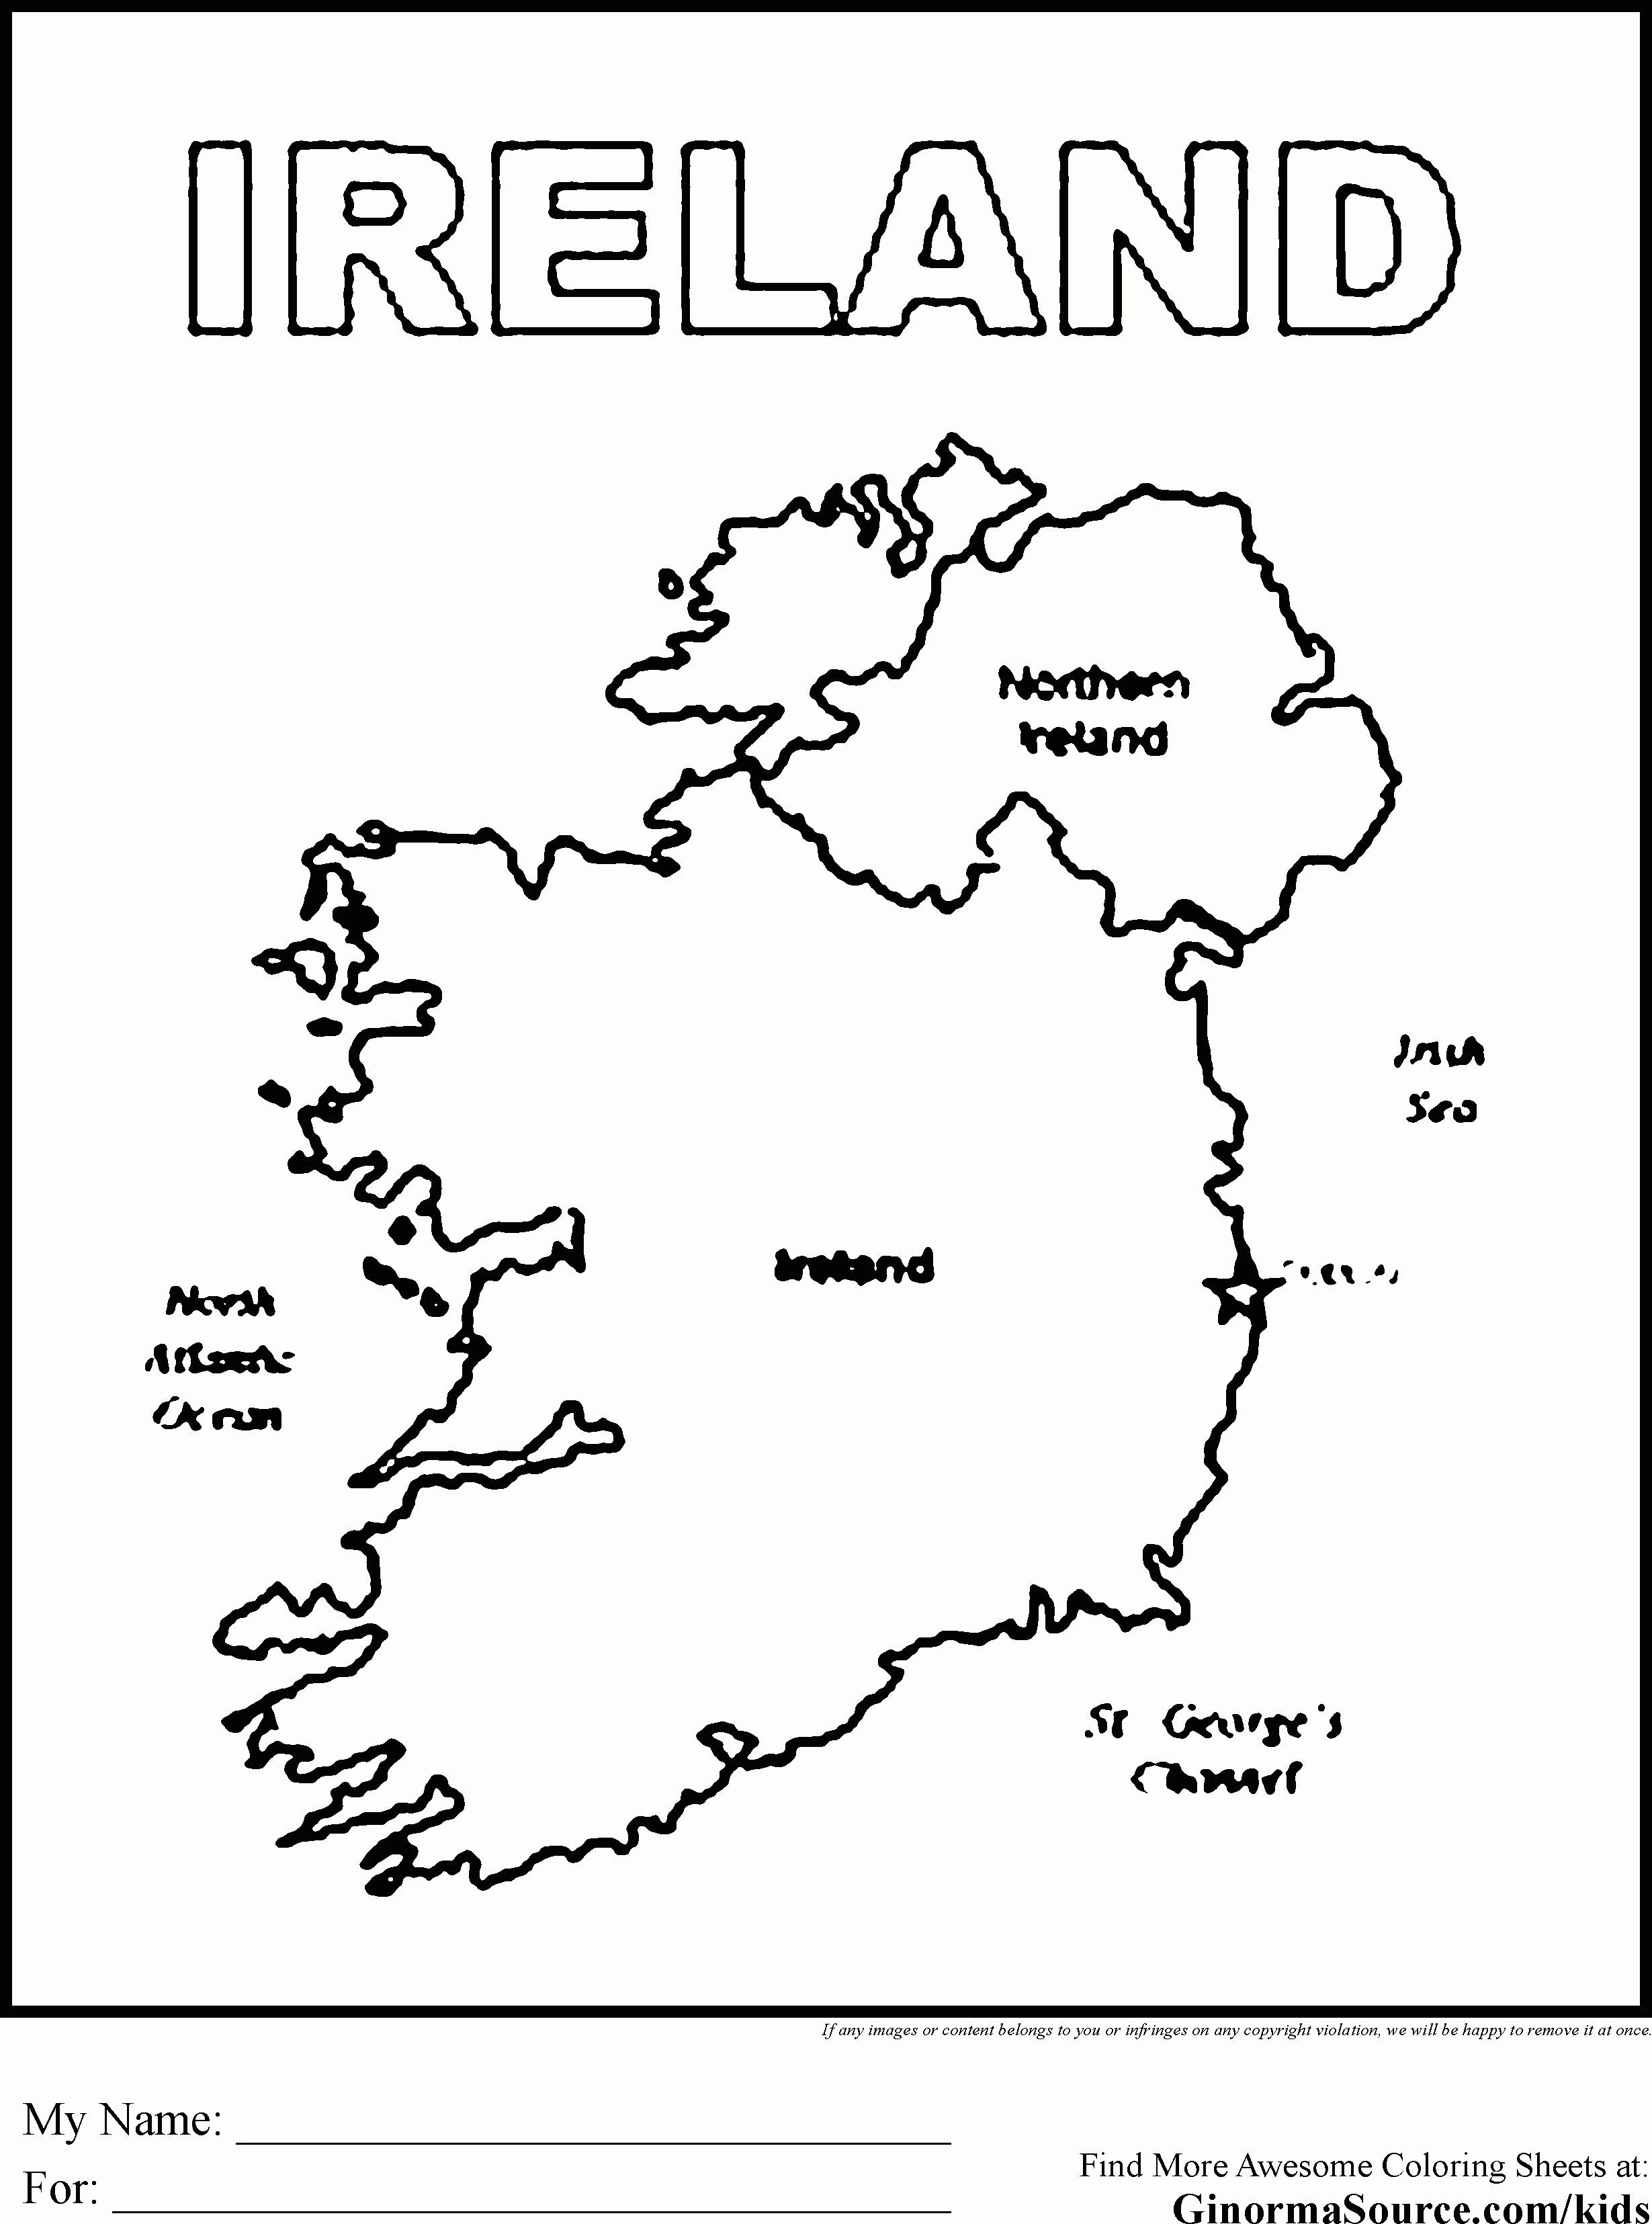 Free map of ireland coloring page download free map of ireland coloring page png images free cliparts on clipart library